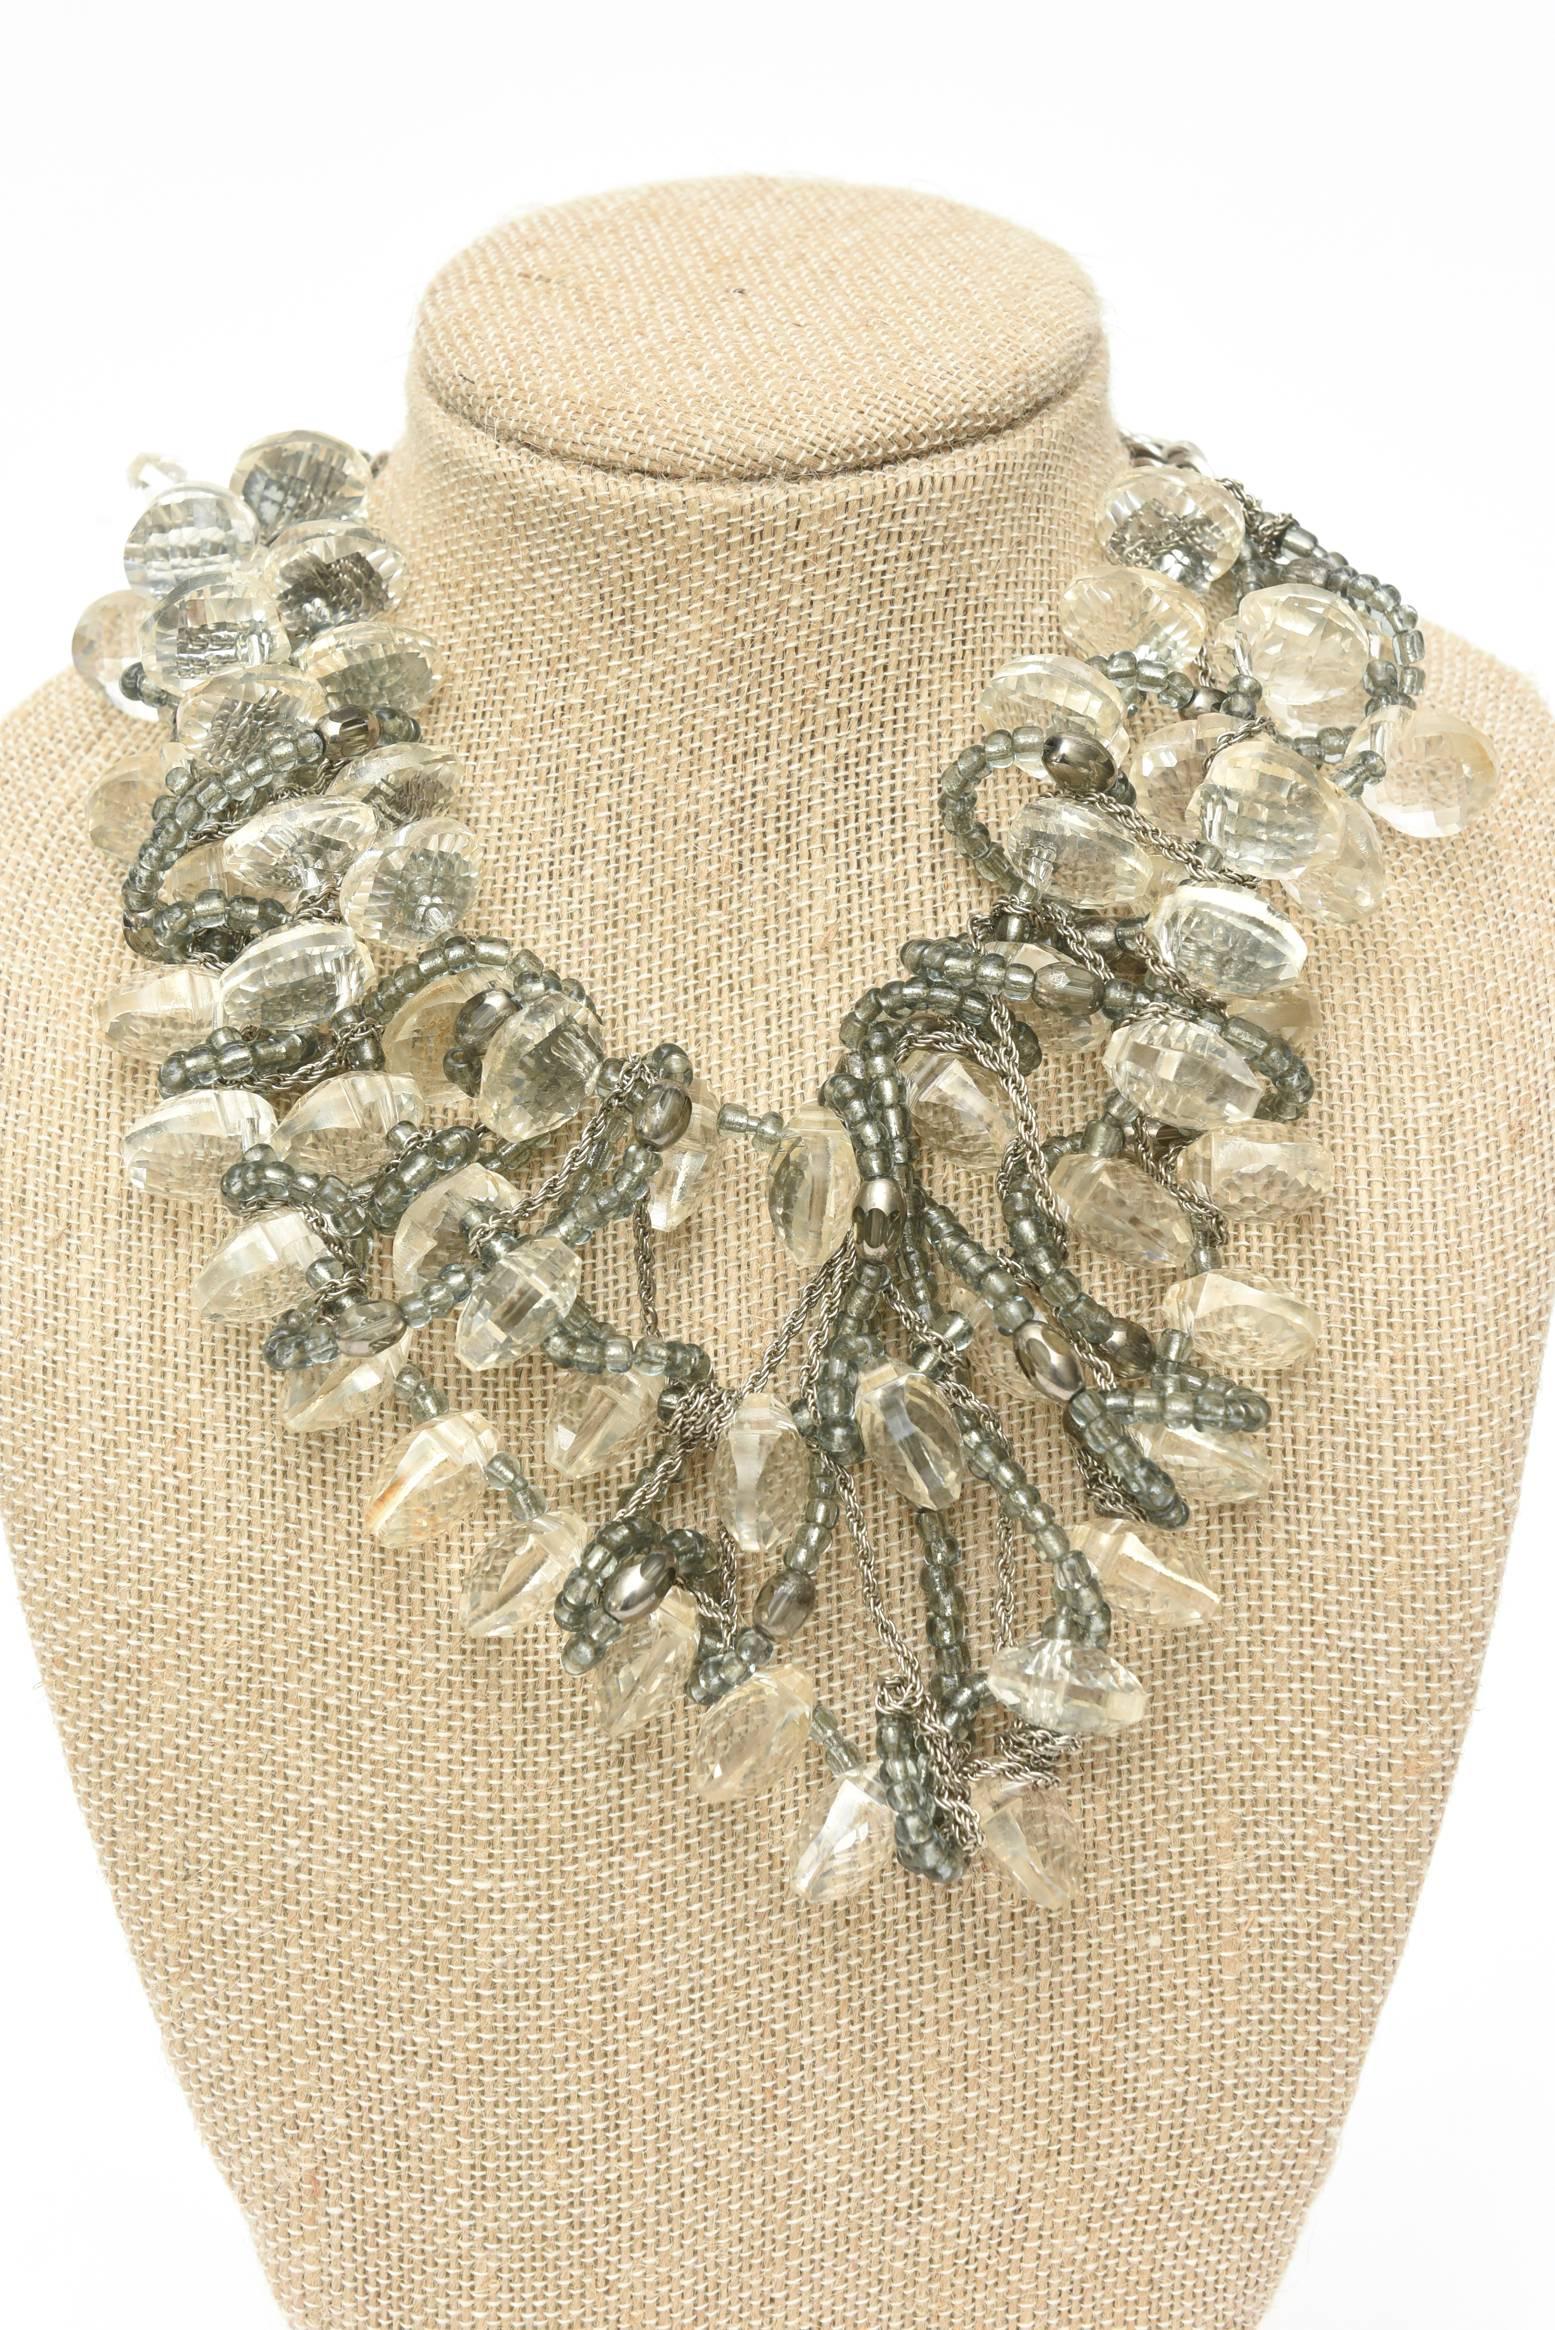  Faceted Lucite Chain, Beads And Silver Bib Multi Strand Necklace Vintage For Sale 1